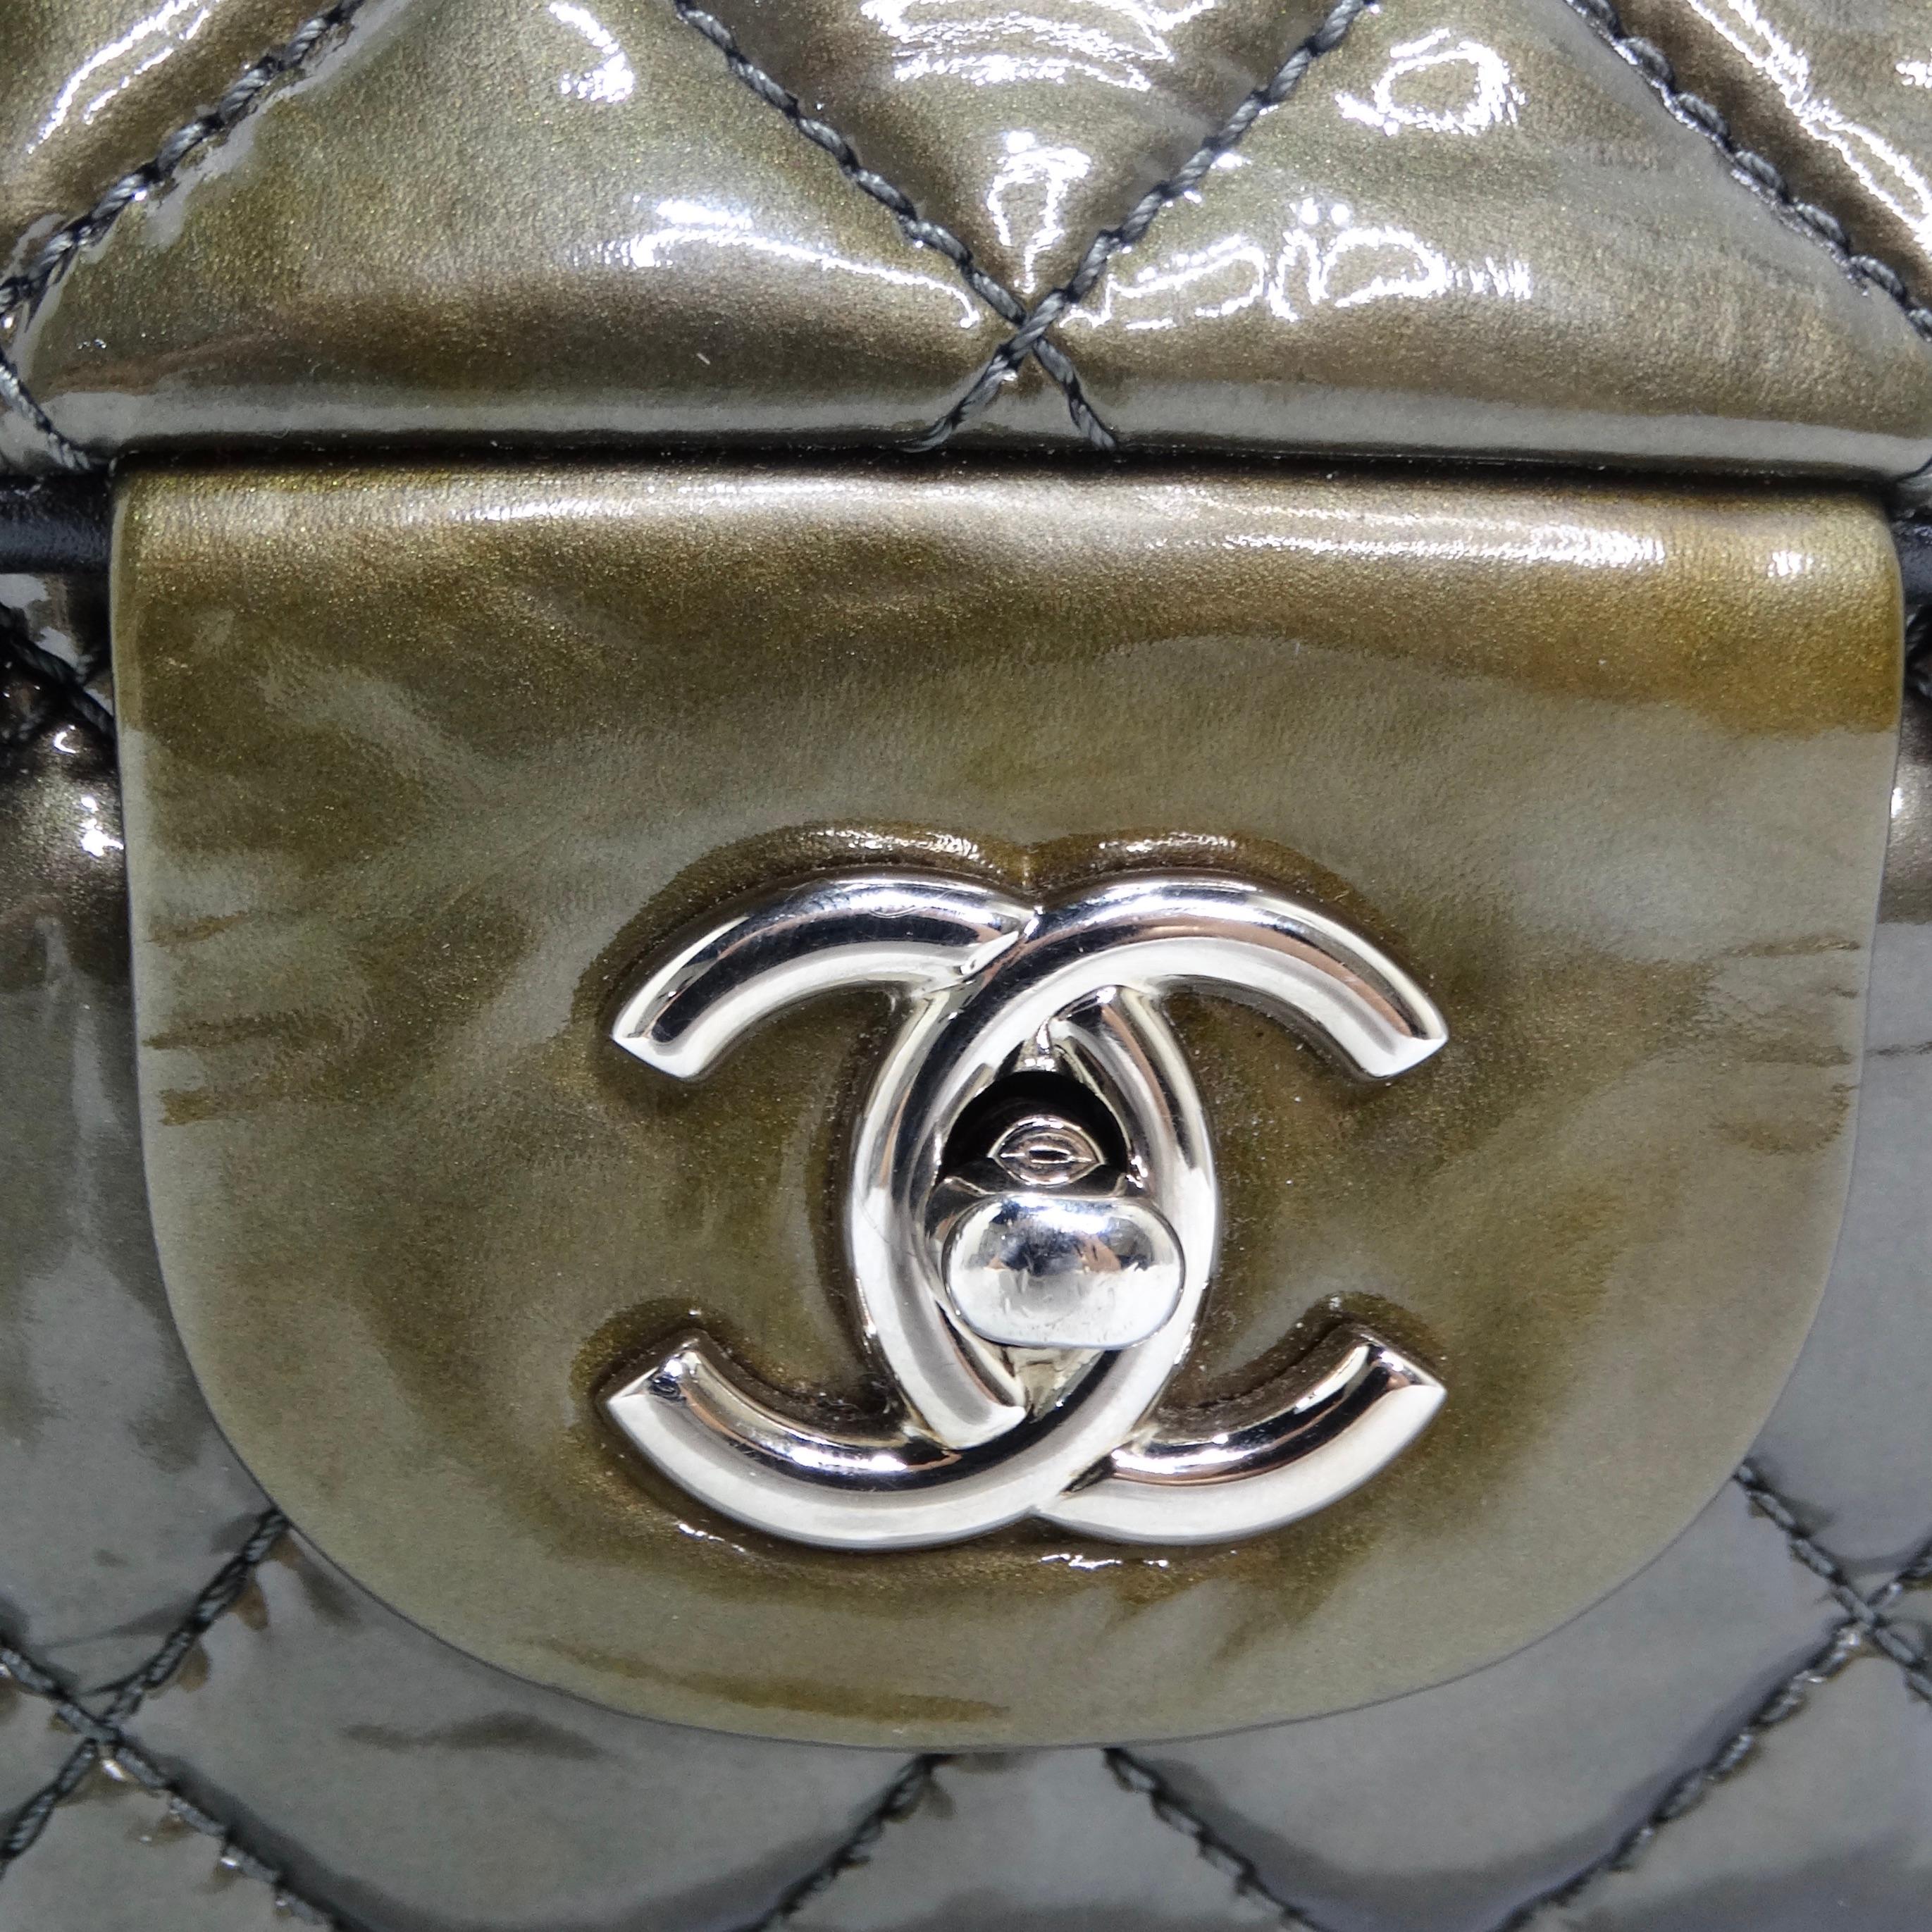 Introducing a handbag that's not just a fashion accessory but a collector's item - the Chanel 2008-2009 Metallic Patent Quilted Jumbo Single Flap in Olive Green. This stunning shoulder bag is crafted from diamond-quilted glossy patent leather,